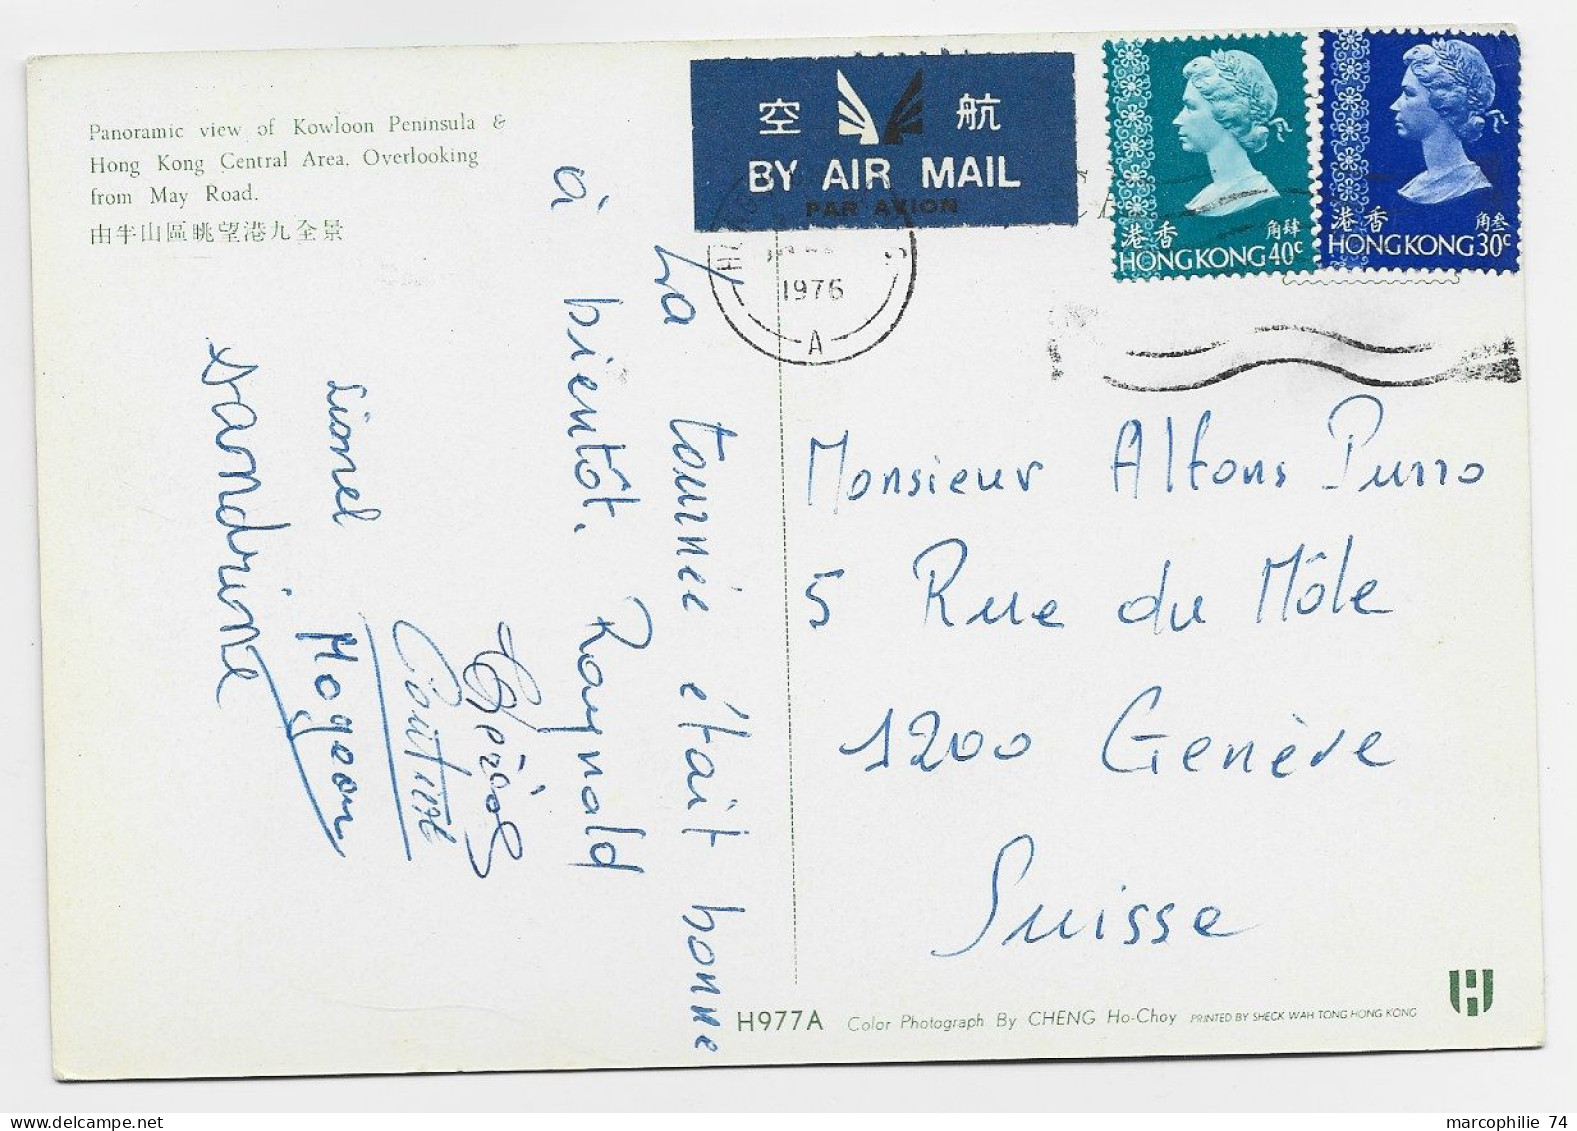 HONG KONG 40C+30C CARD AIR MAIL 1976 TO SUISSE - Storia Postale